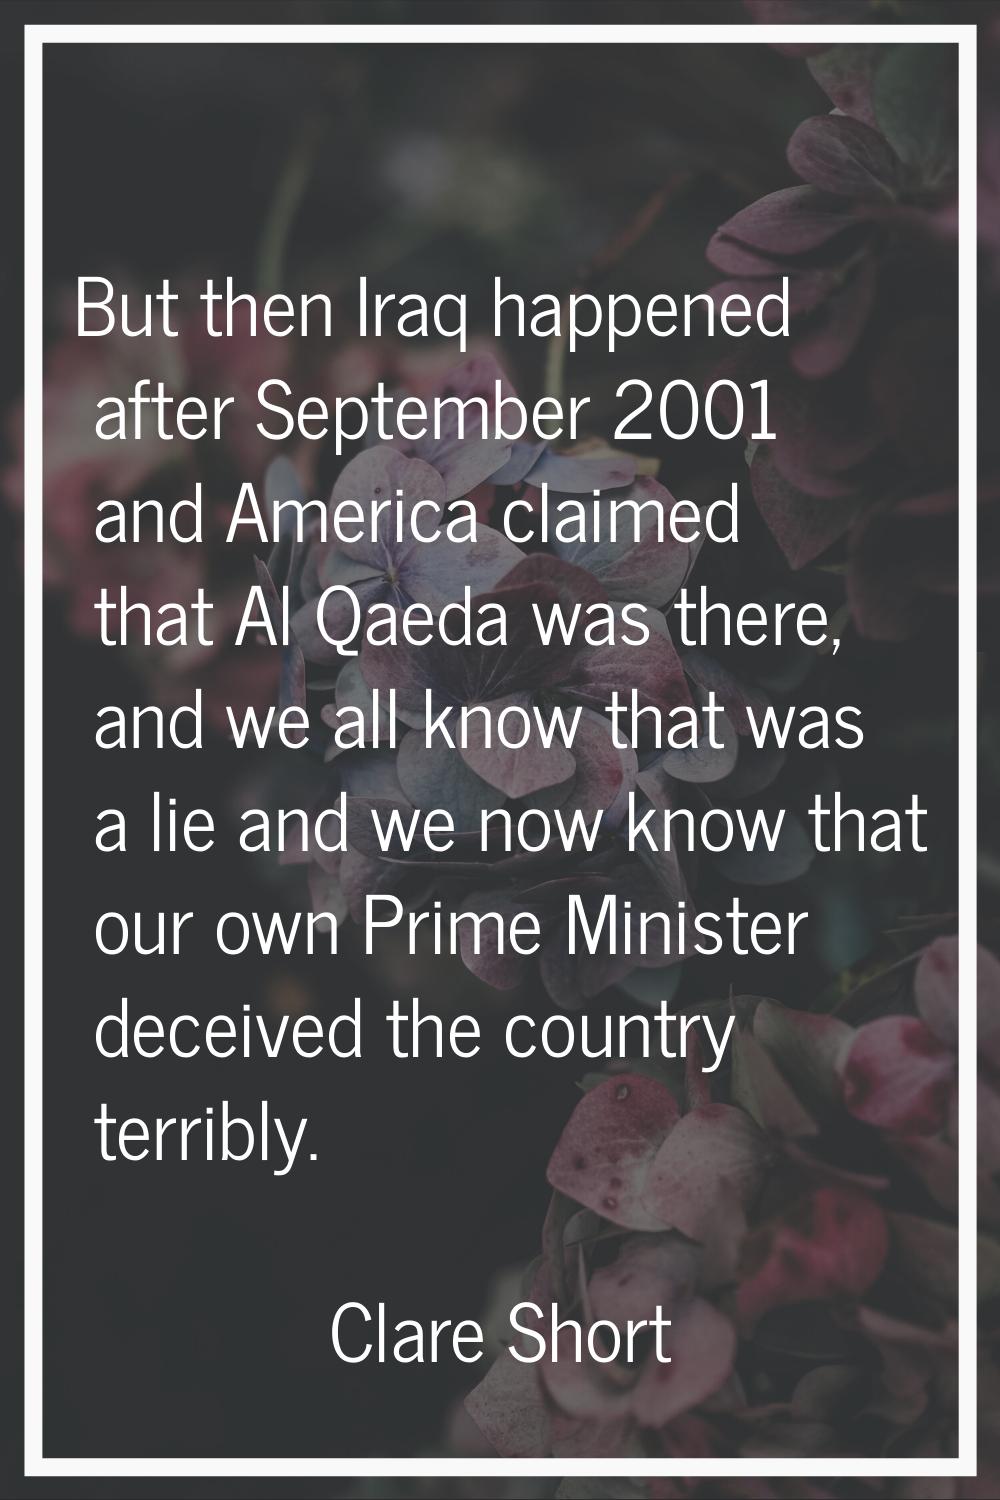 But then Iraq happened after September 2001 and America claimed that Al Qaeda was there, and we all